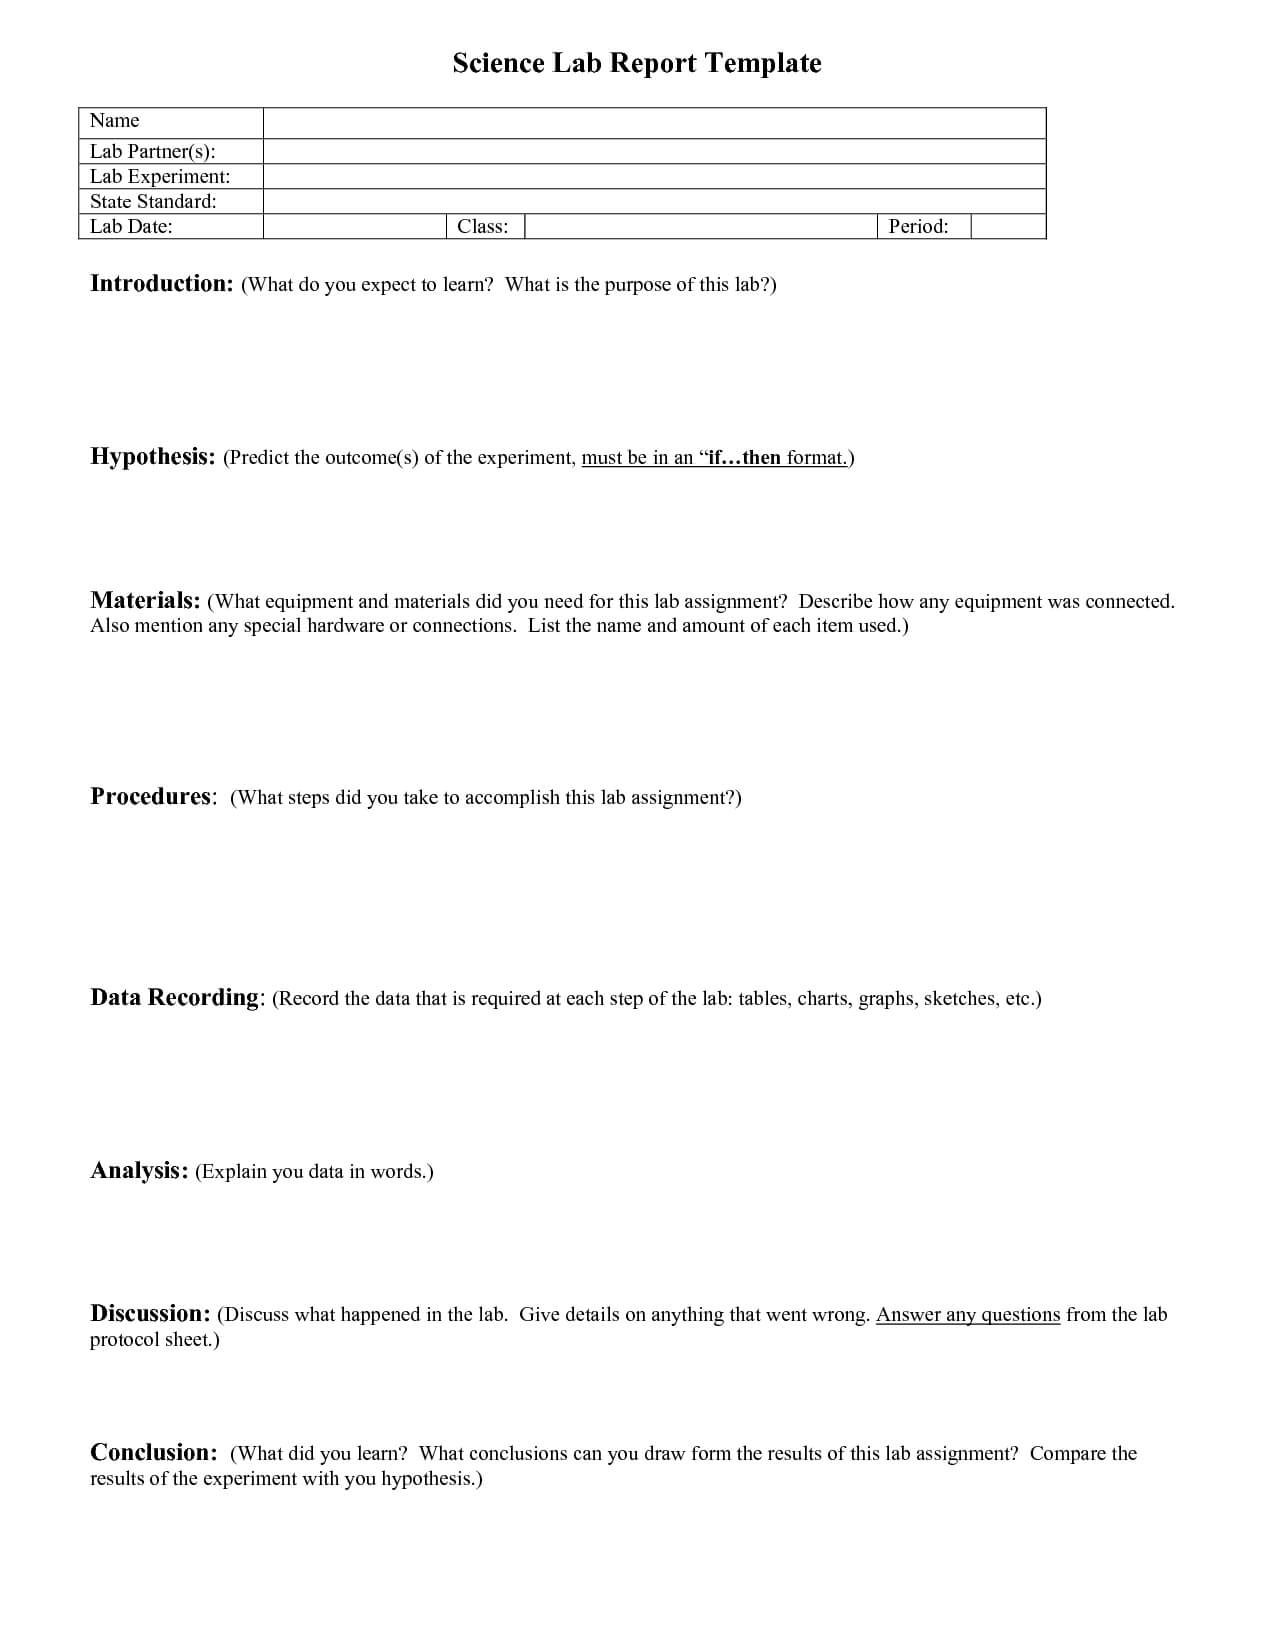 Lab Report Outline | Science Lab Report Template | School With Regard To Science Experiment Report Template